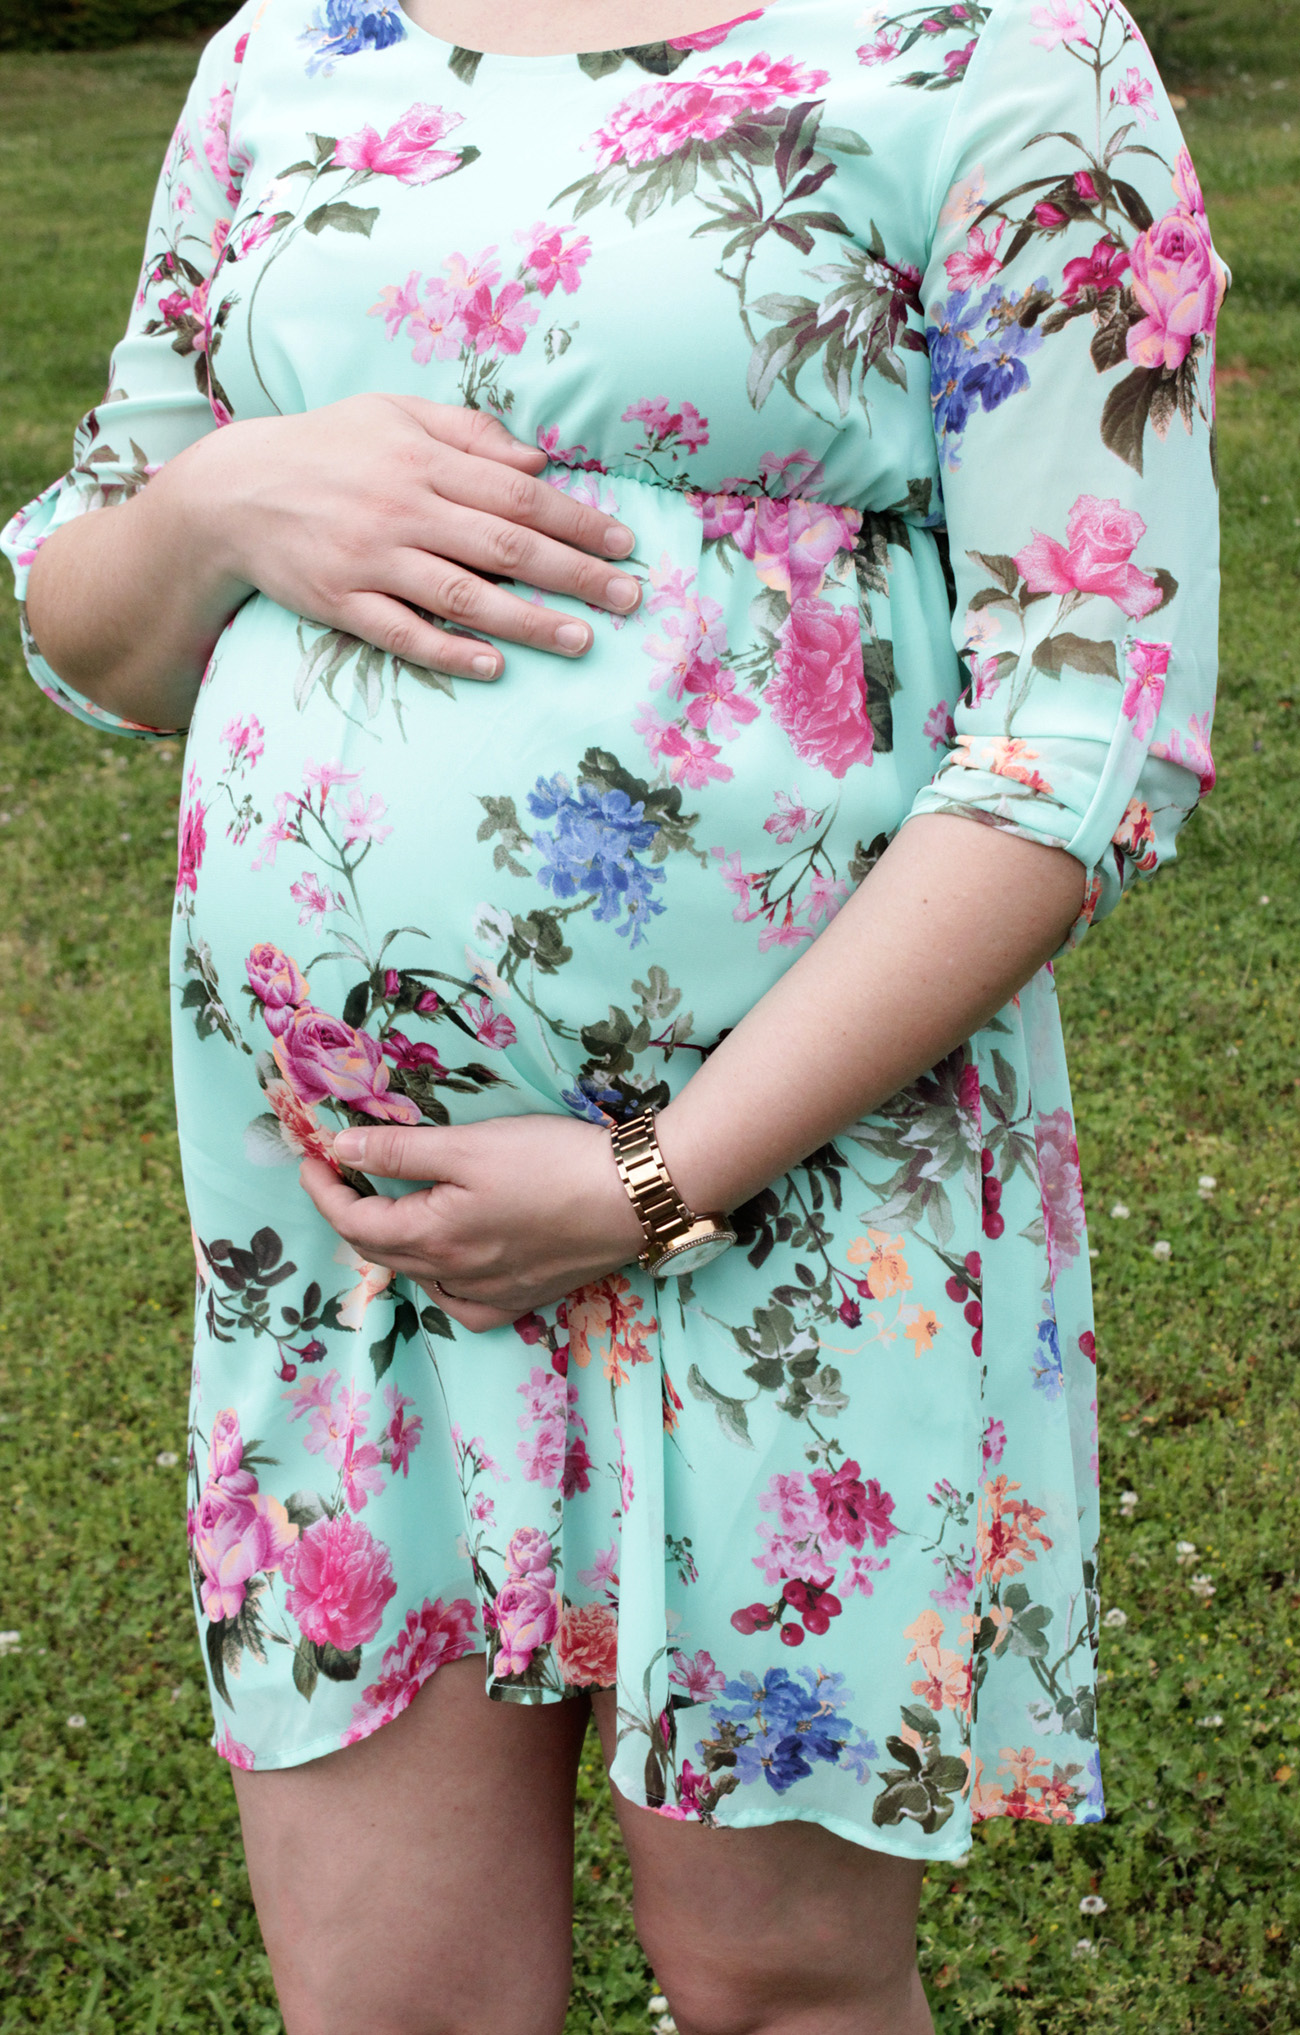 Recent PinkBlush Maternity Favorites - My Kind of Sweet